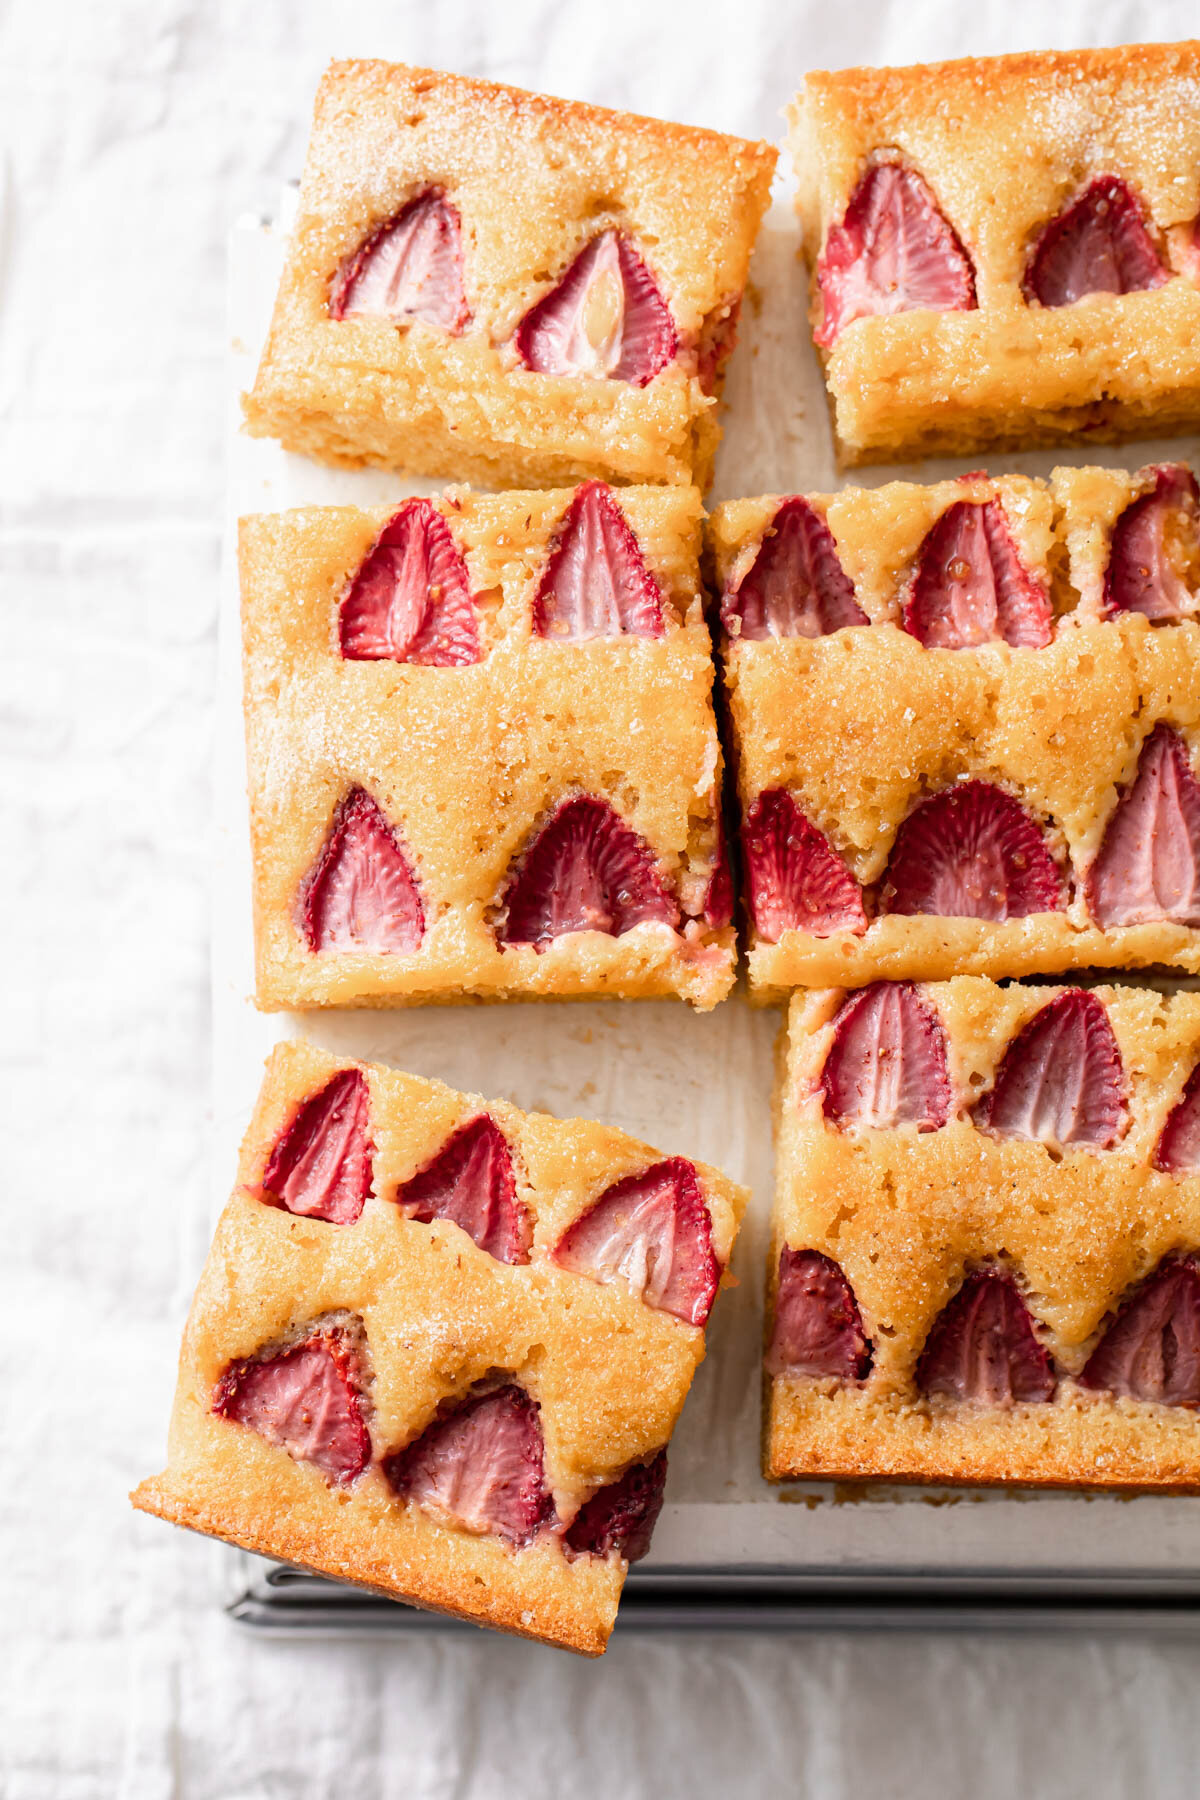 Strawberry Snacking Cake with Lavender Sugar